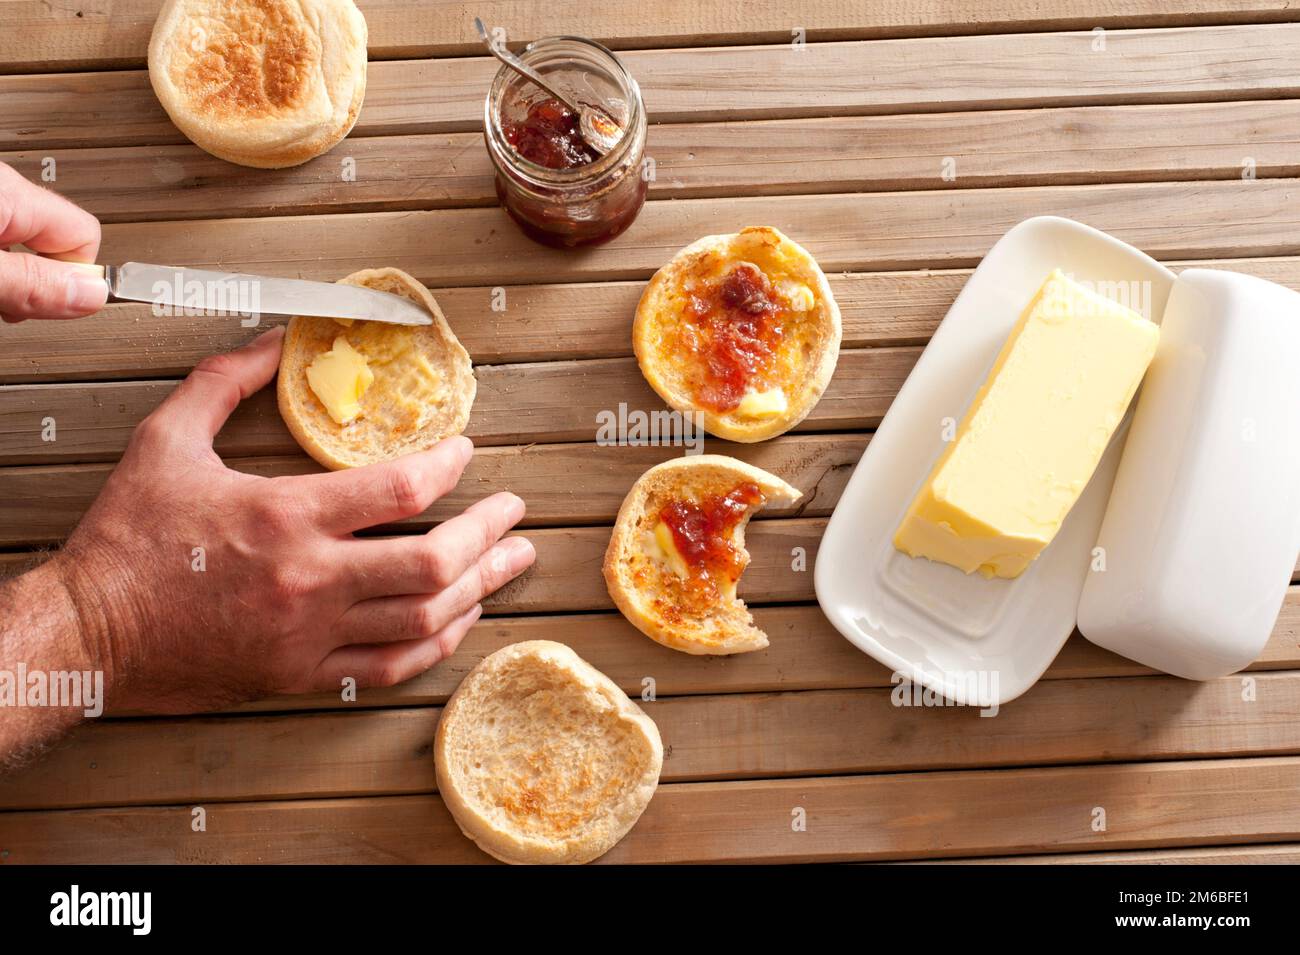 Man buttering a crumpet for breakfast Stock Photo